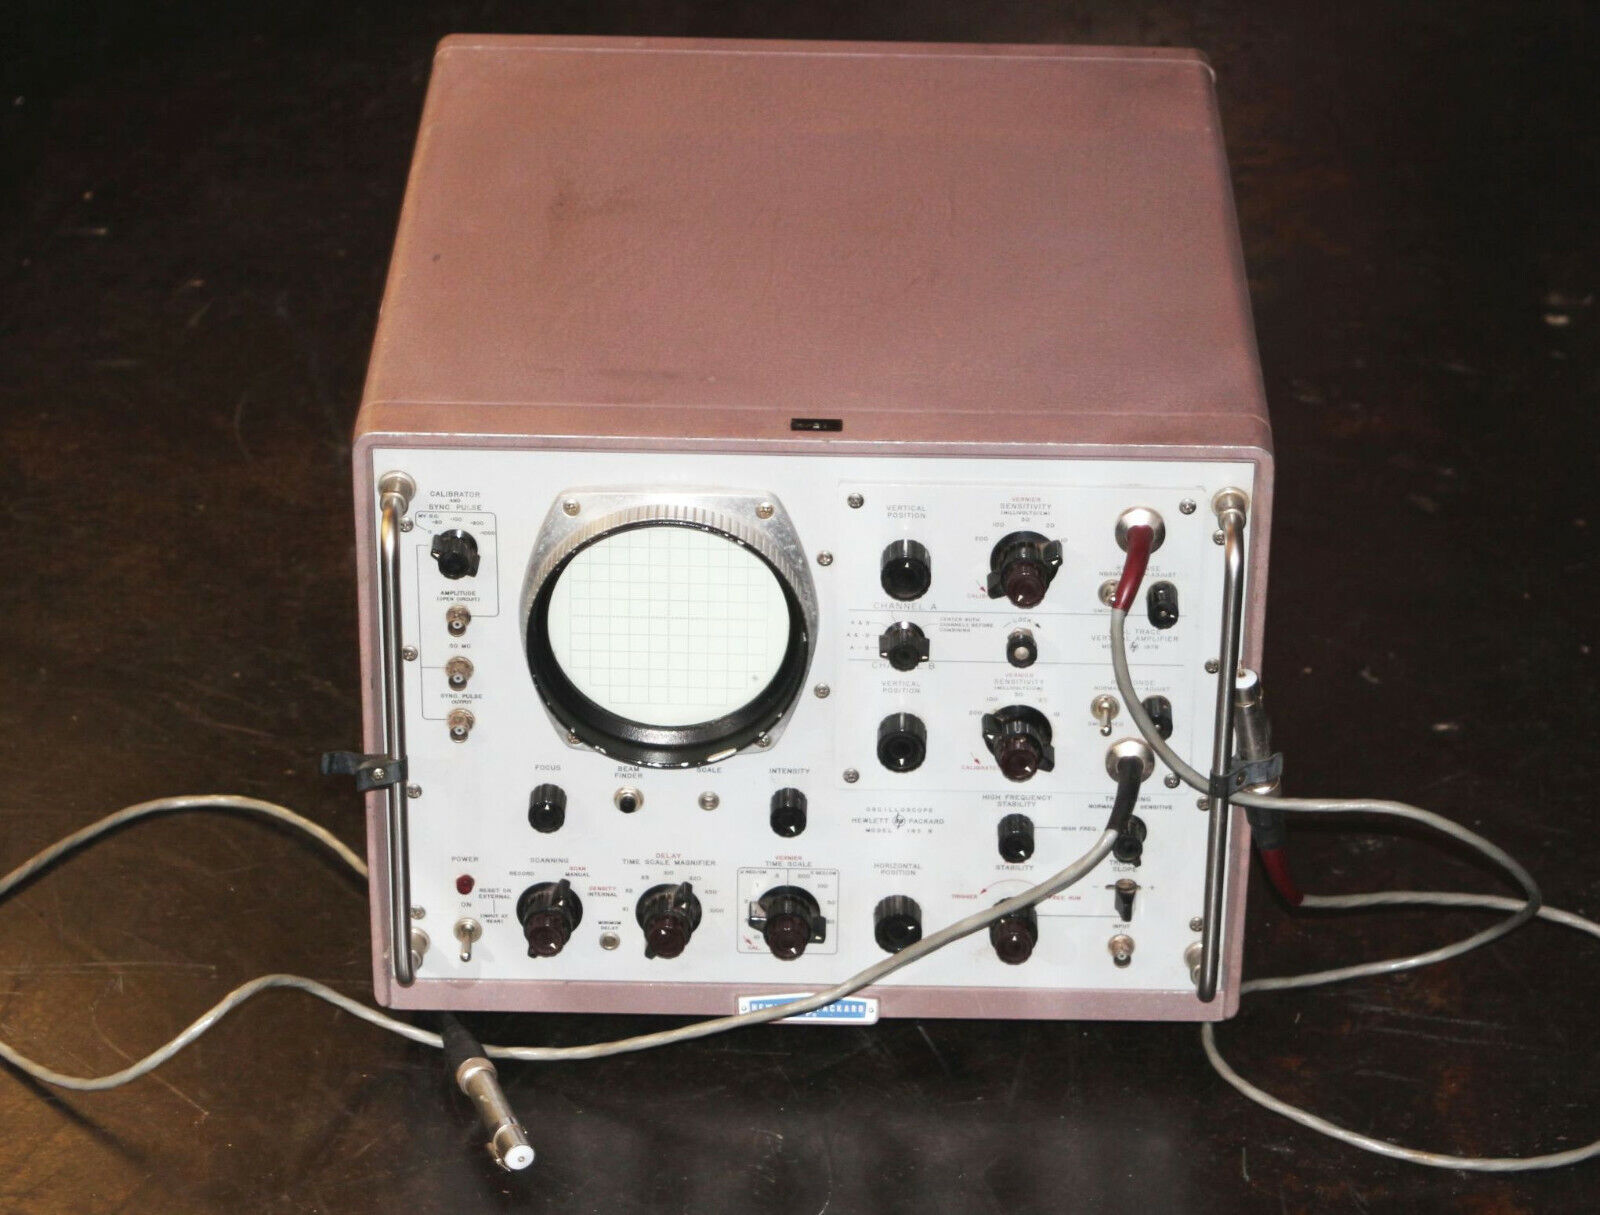 Vintage Spring new work one after Quantity limited another 1960s HP 187B Kilomegacycle Cold Sampling Oscilloscope